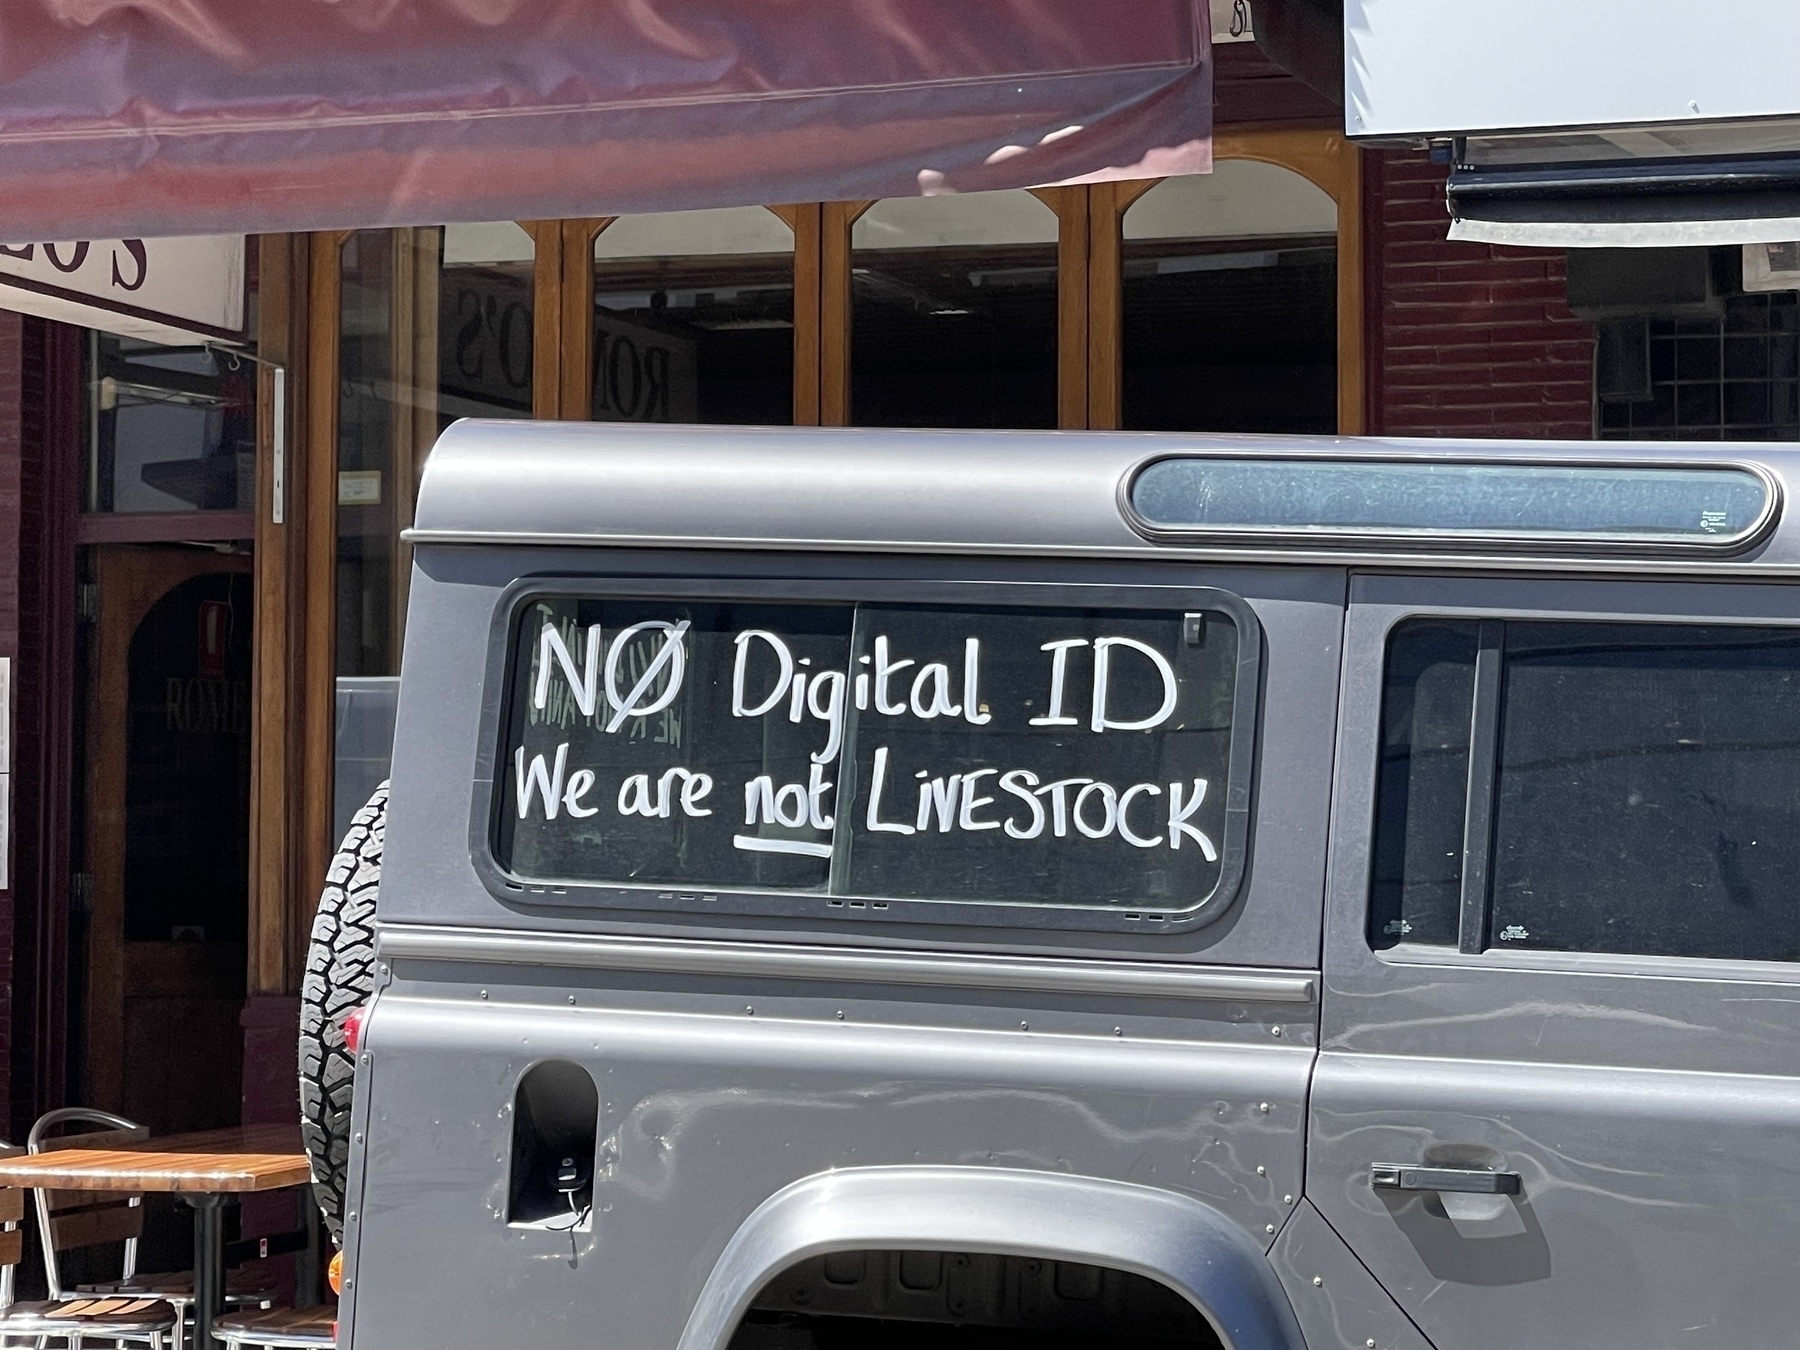 A hand painted sign on the side of a truck that reads “No digital ID. We are not livestock.”